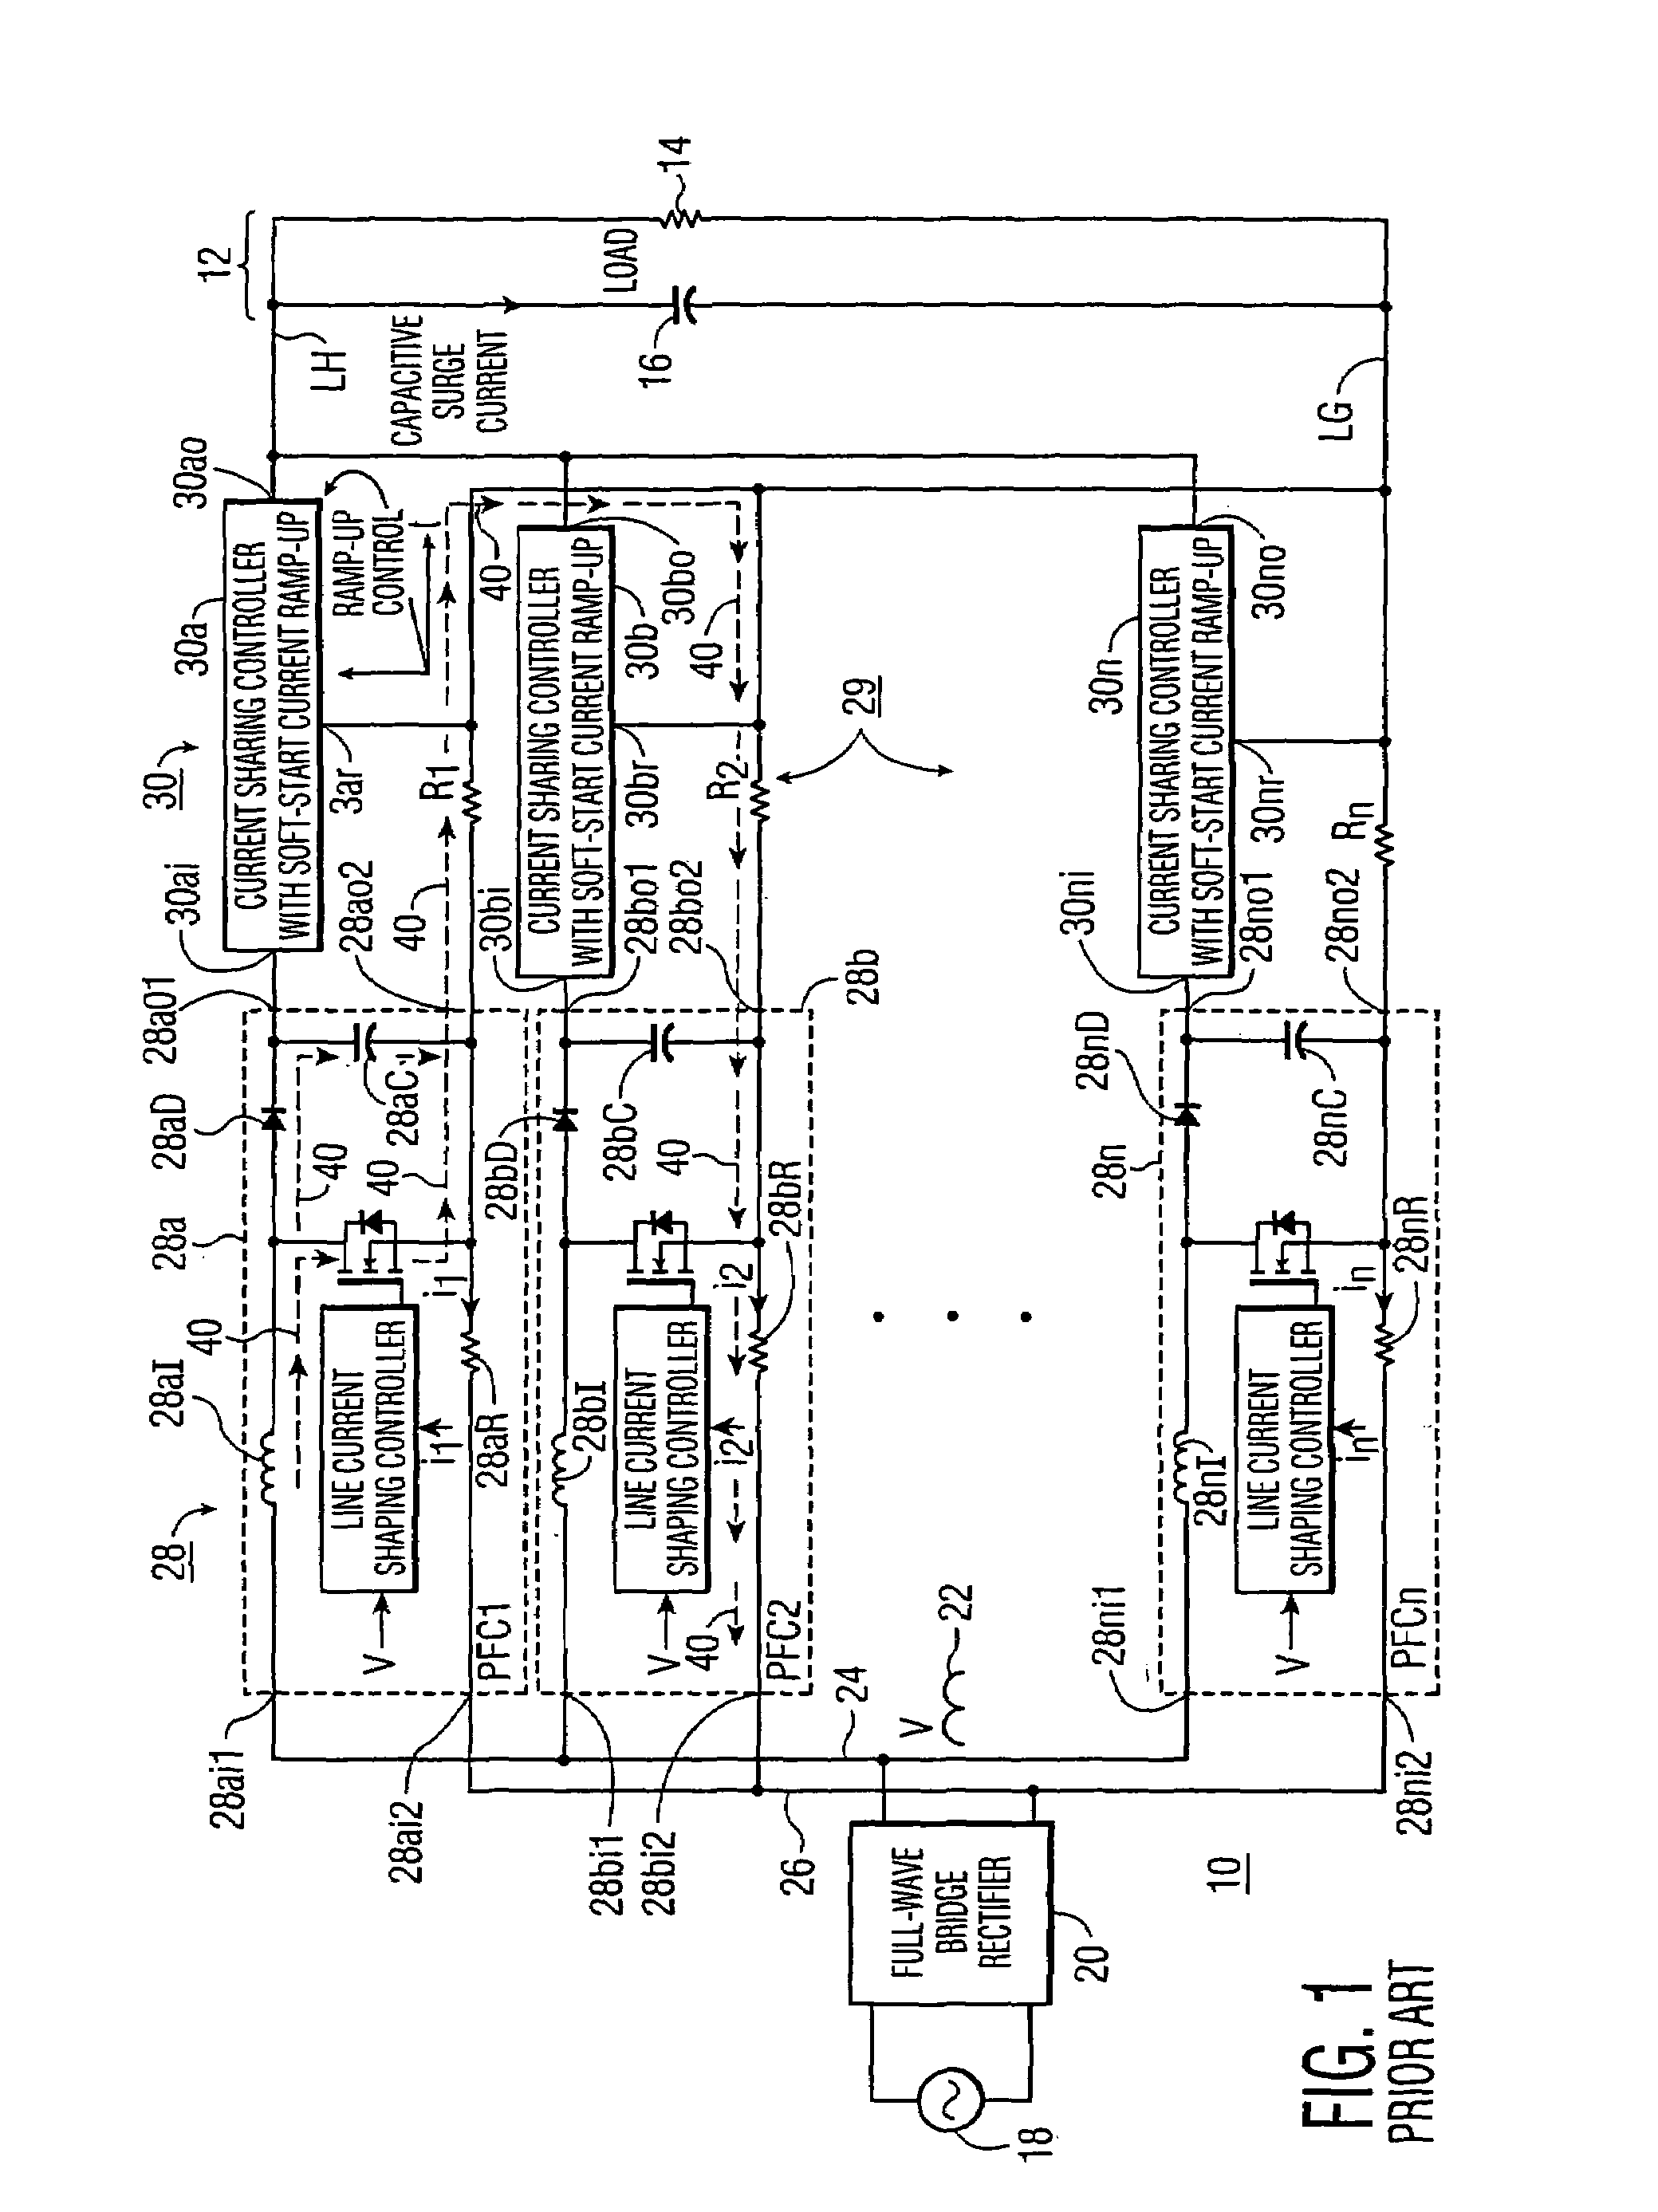 Precharging load capacitor for power-factor-corrected AC-to-DC power supply